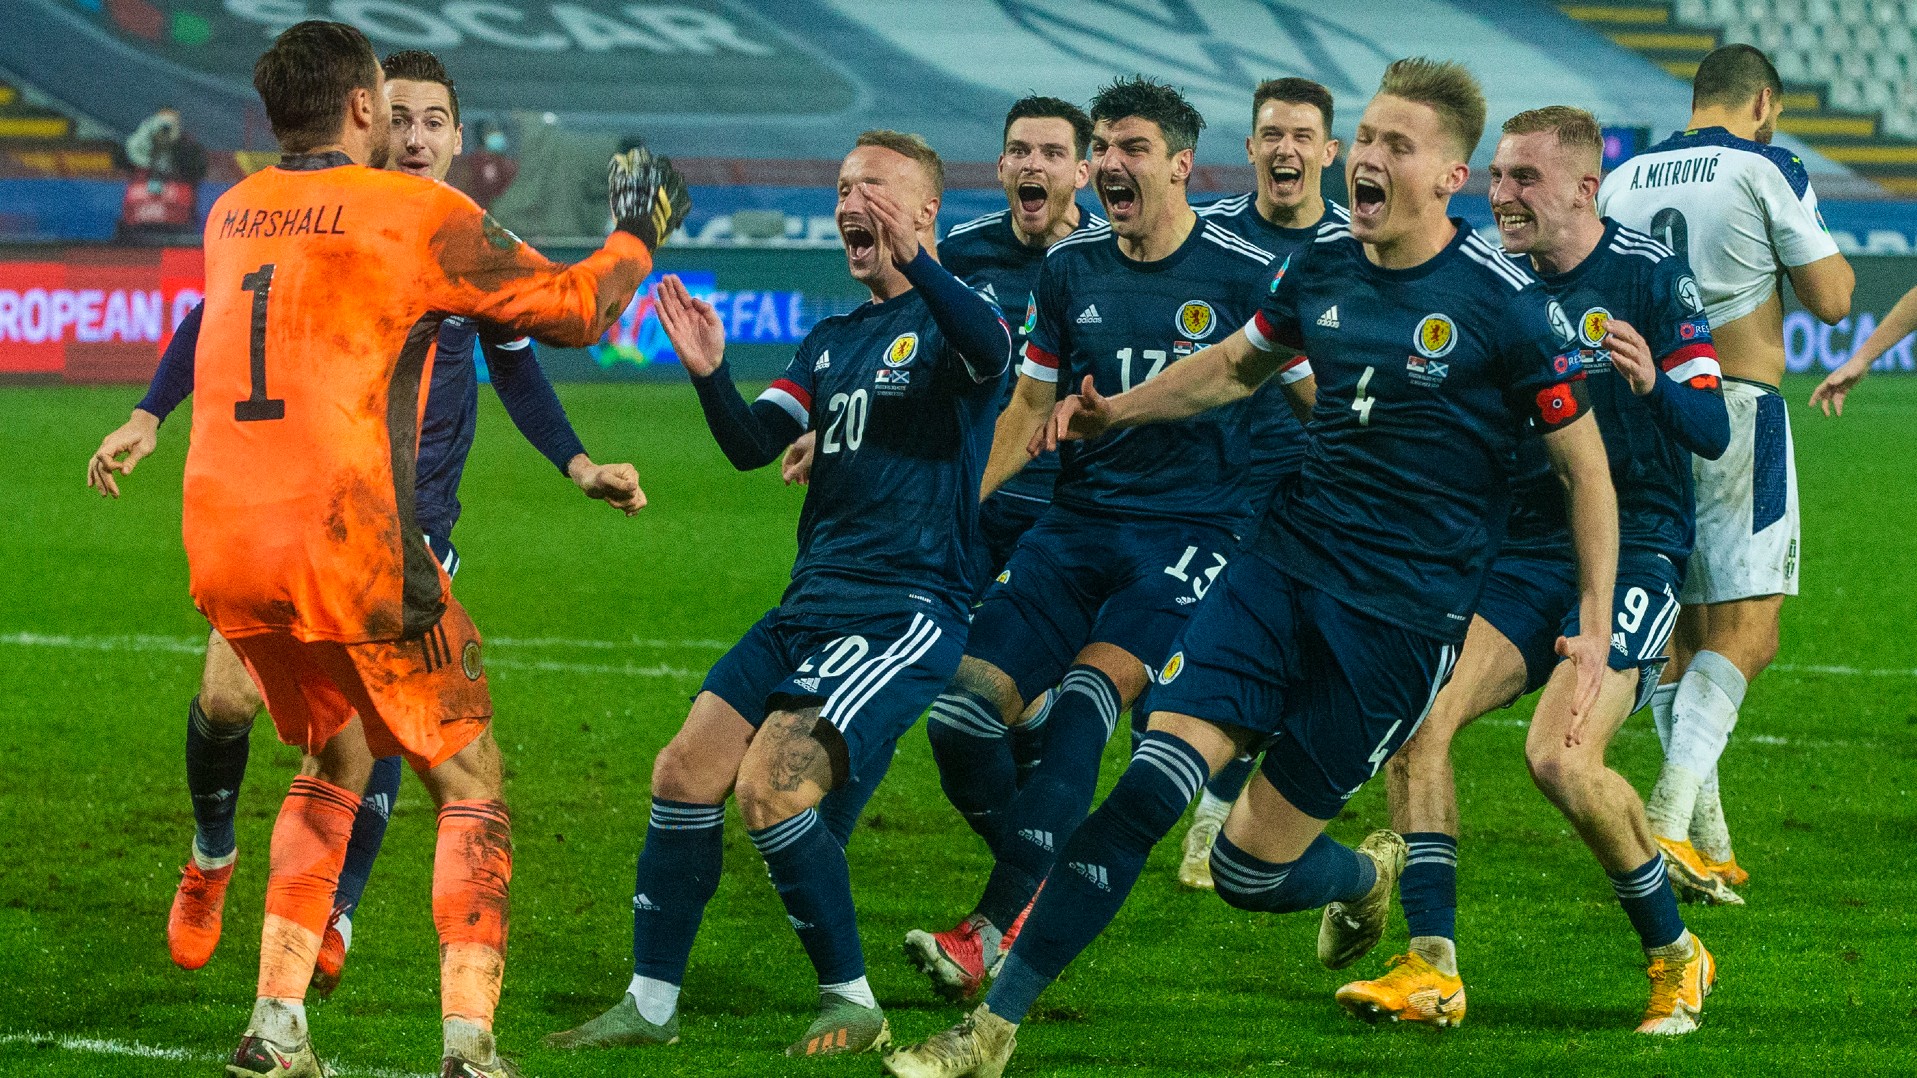 Scotland beat Serbia in the play-off final to reach Euro 2020. (Photo by Nikola Krstic / SNS Group)